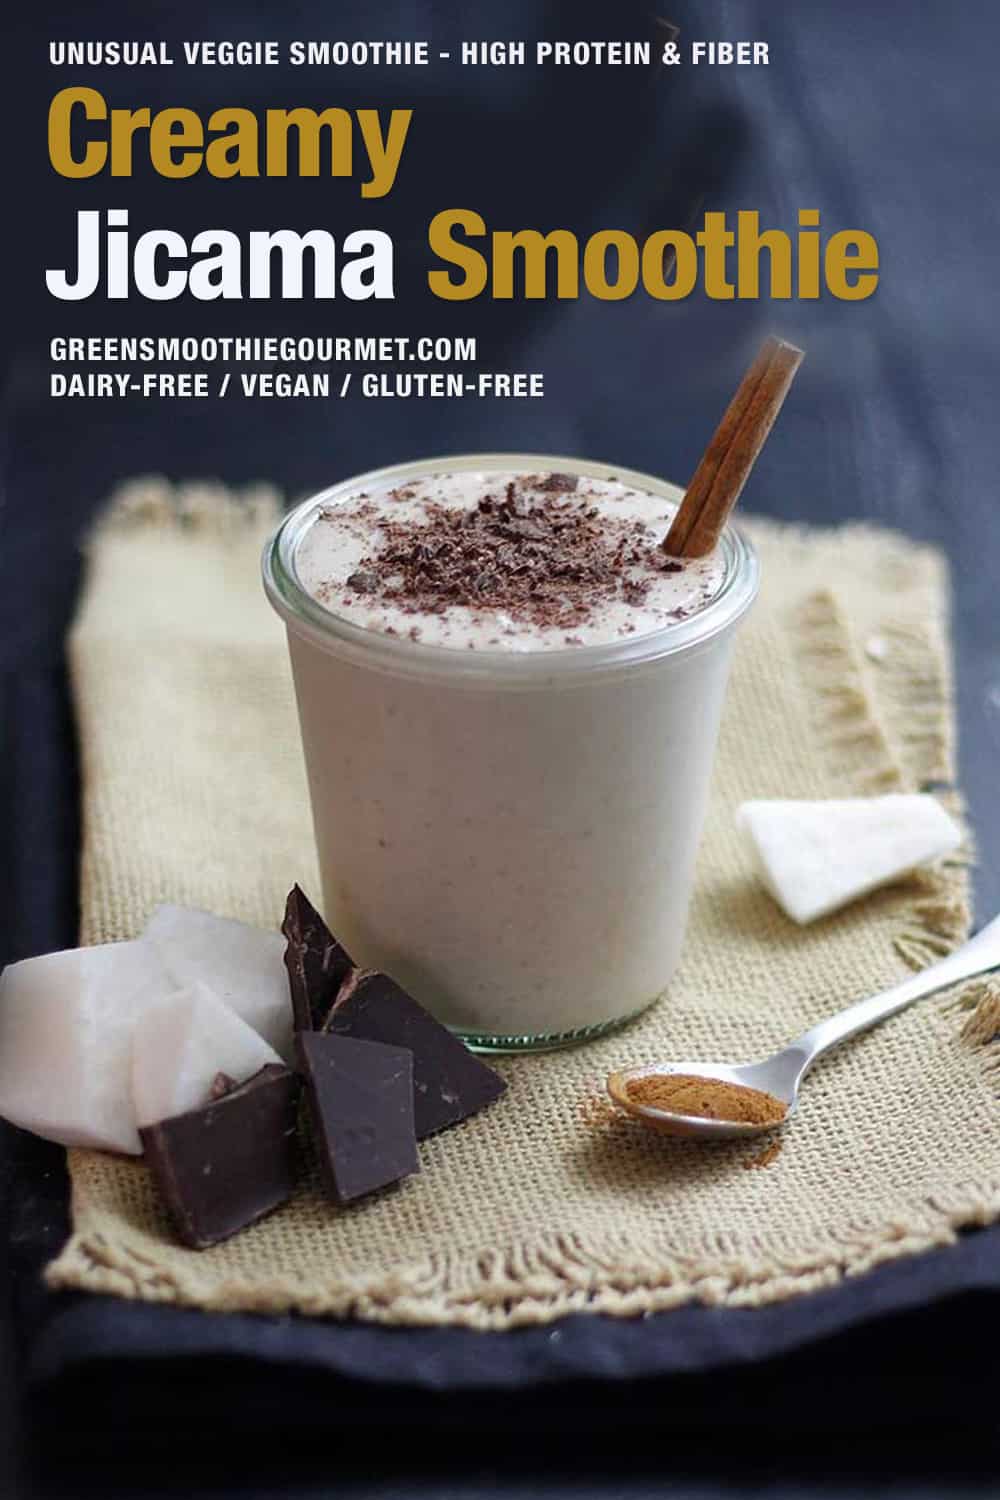 jicama smoothie in a cup with chopped chocolate and chunks of jicama on a cloth